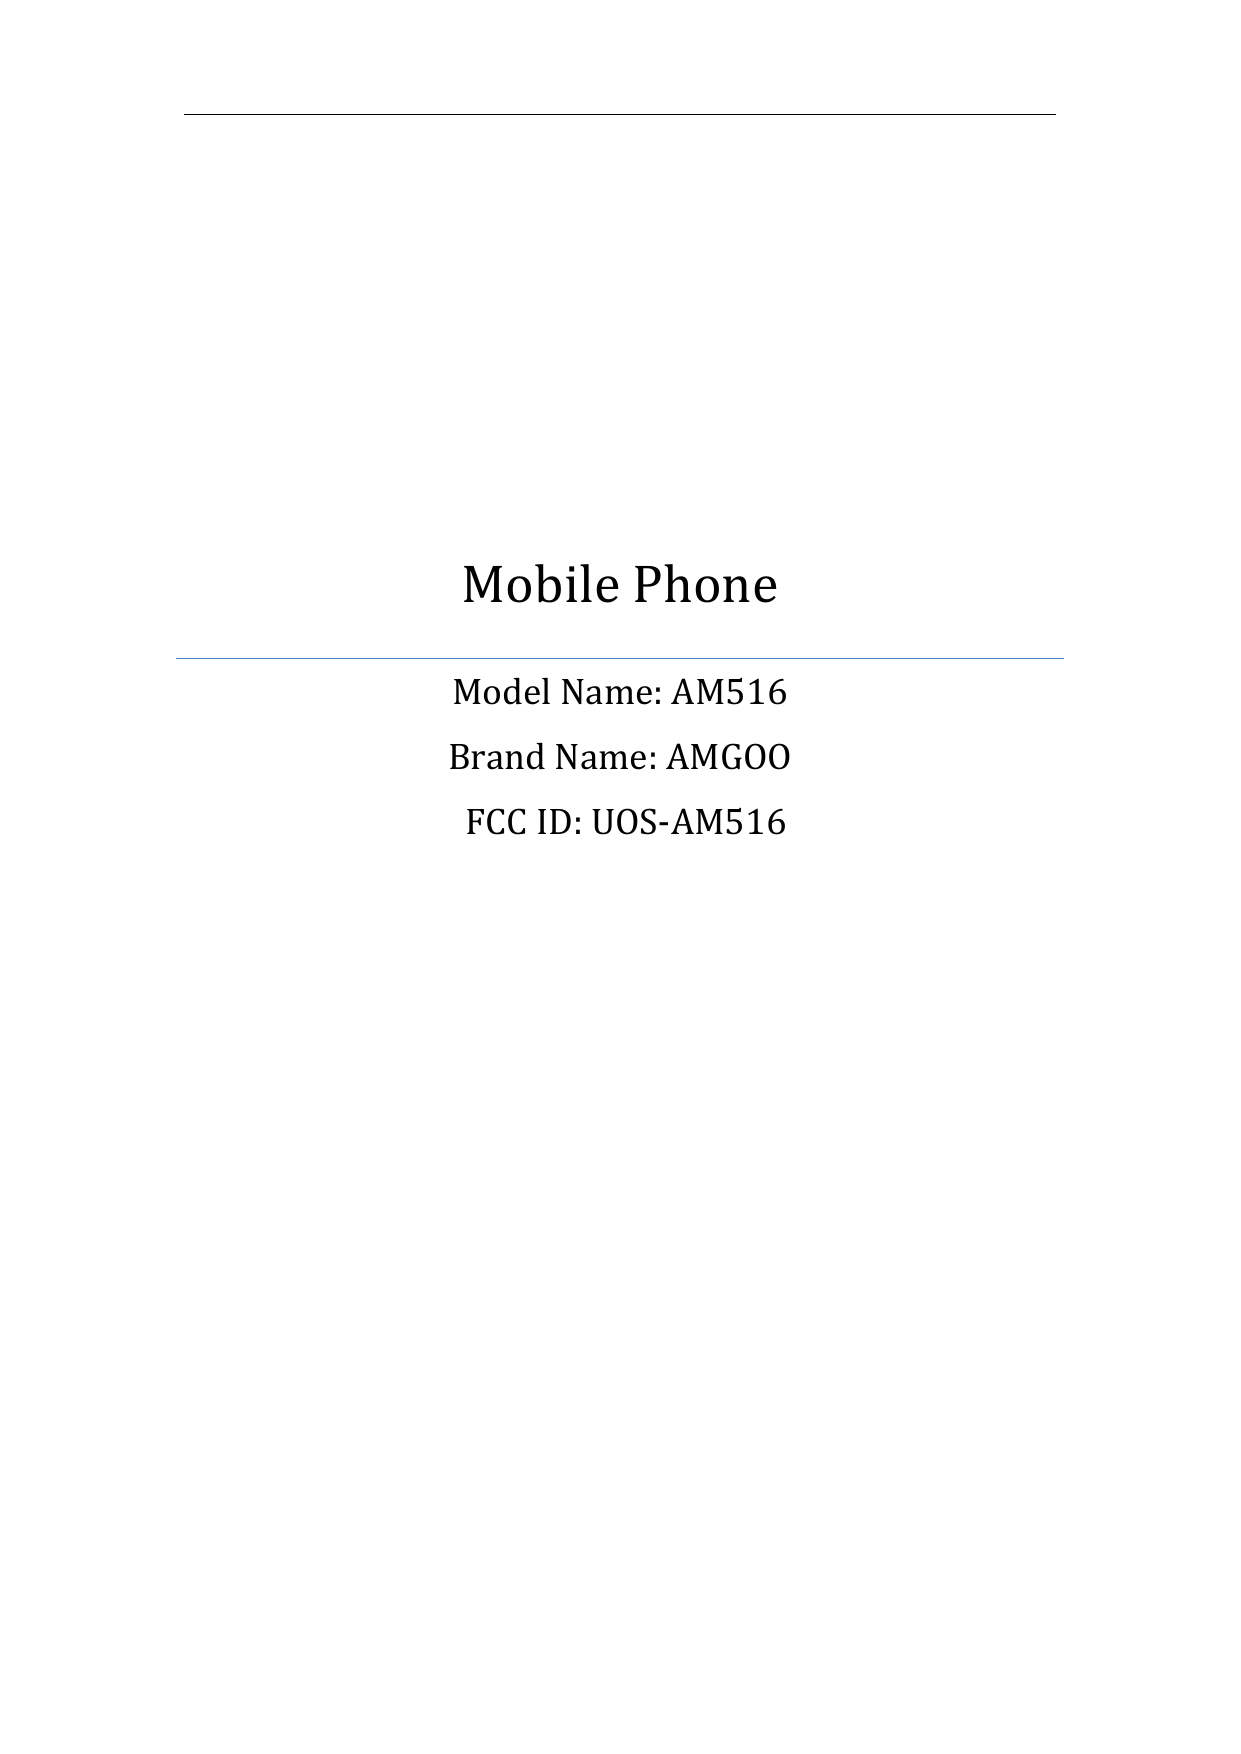 Mobile PhoneModel Name: AM516Brand Name: AMGOOFCC ID: UOS-AM516